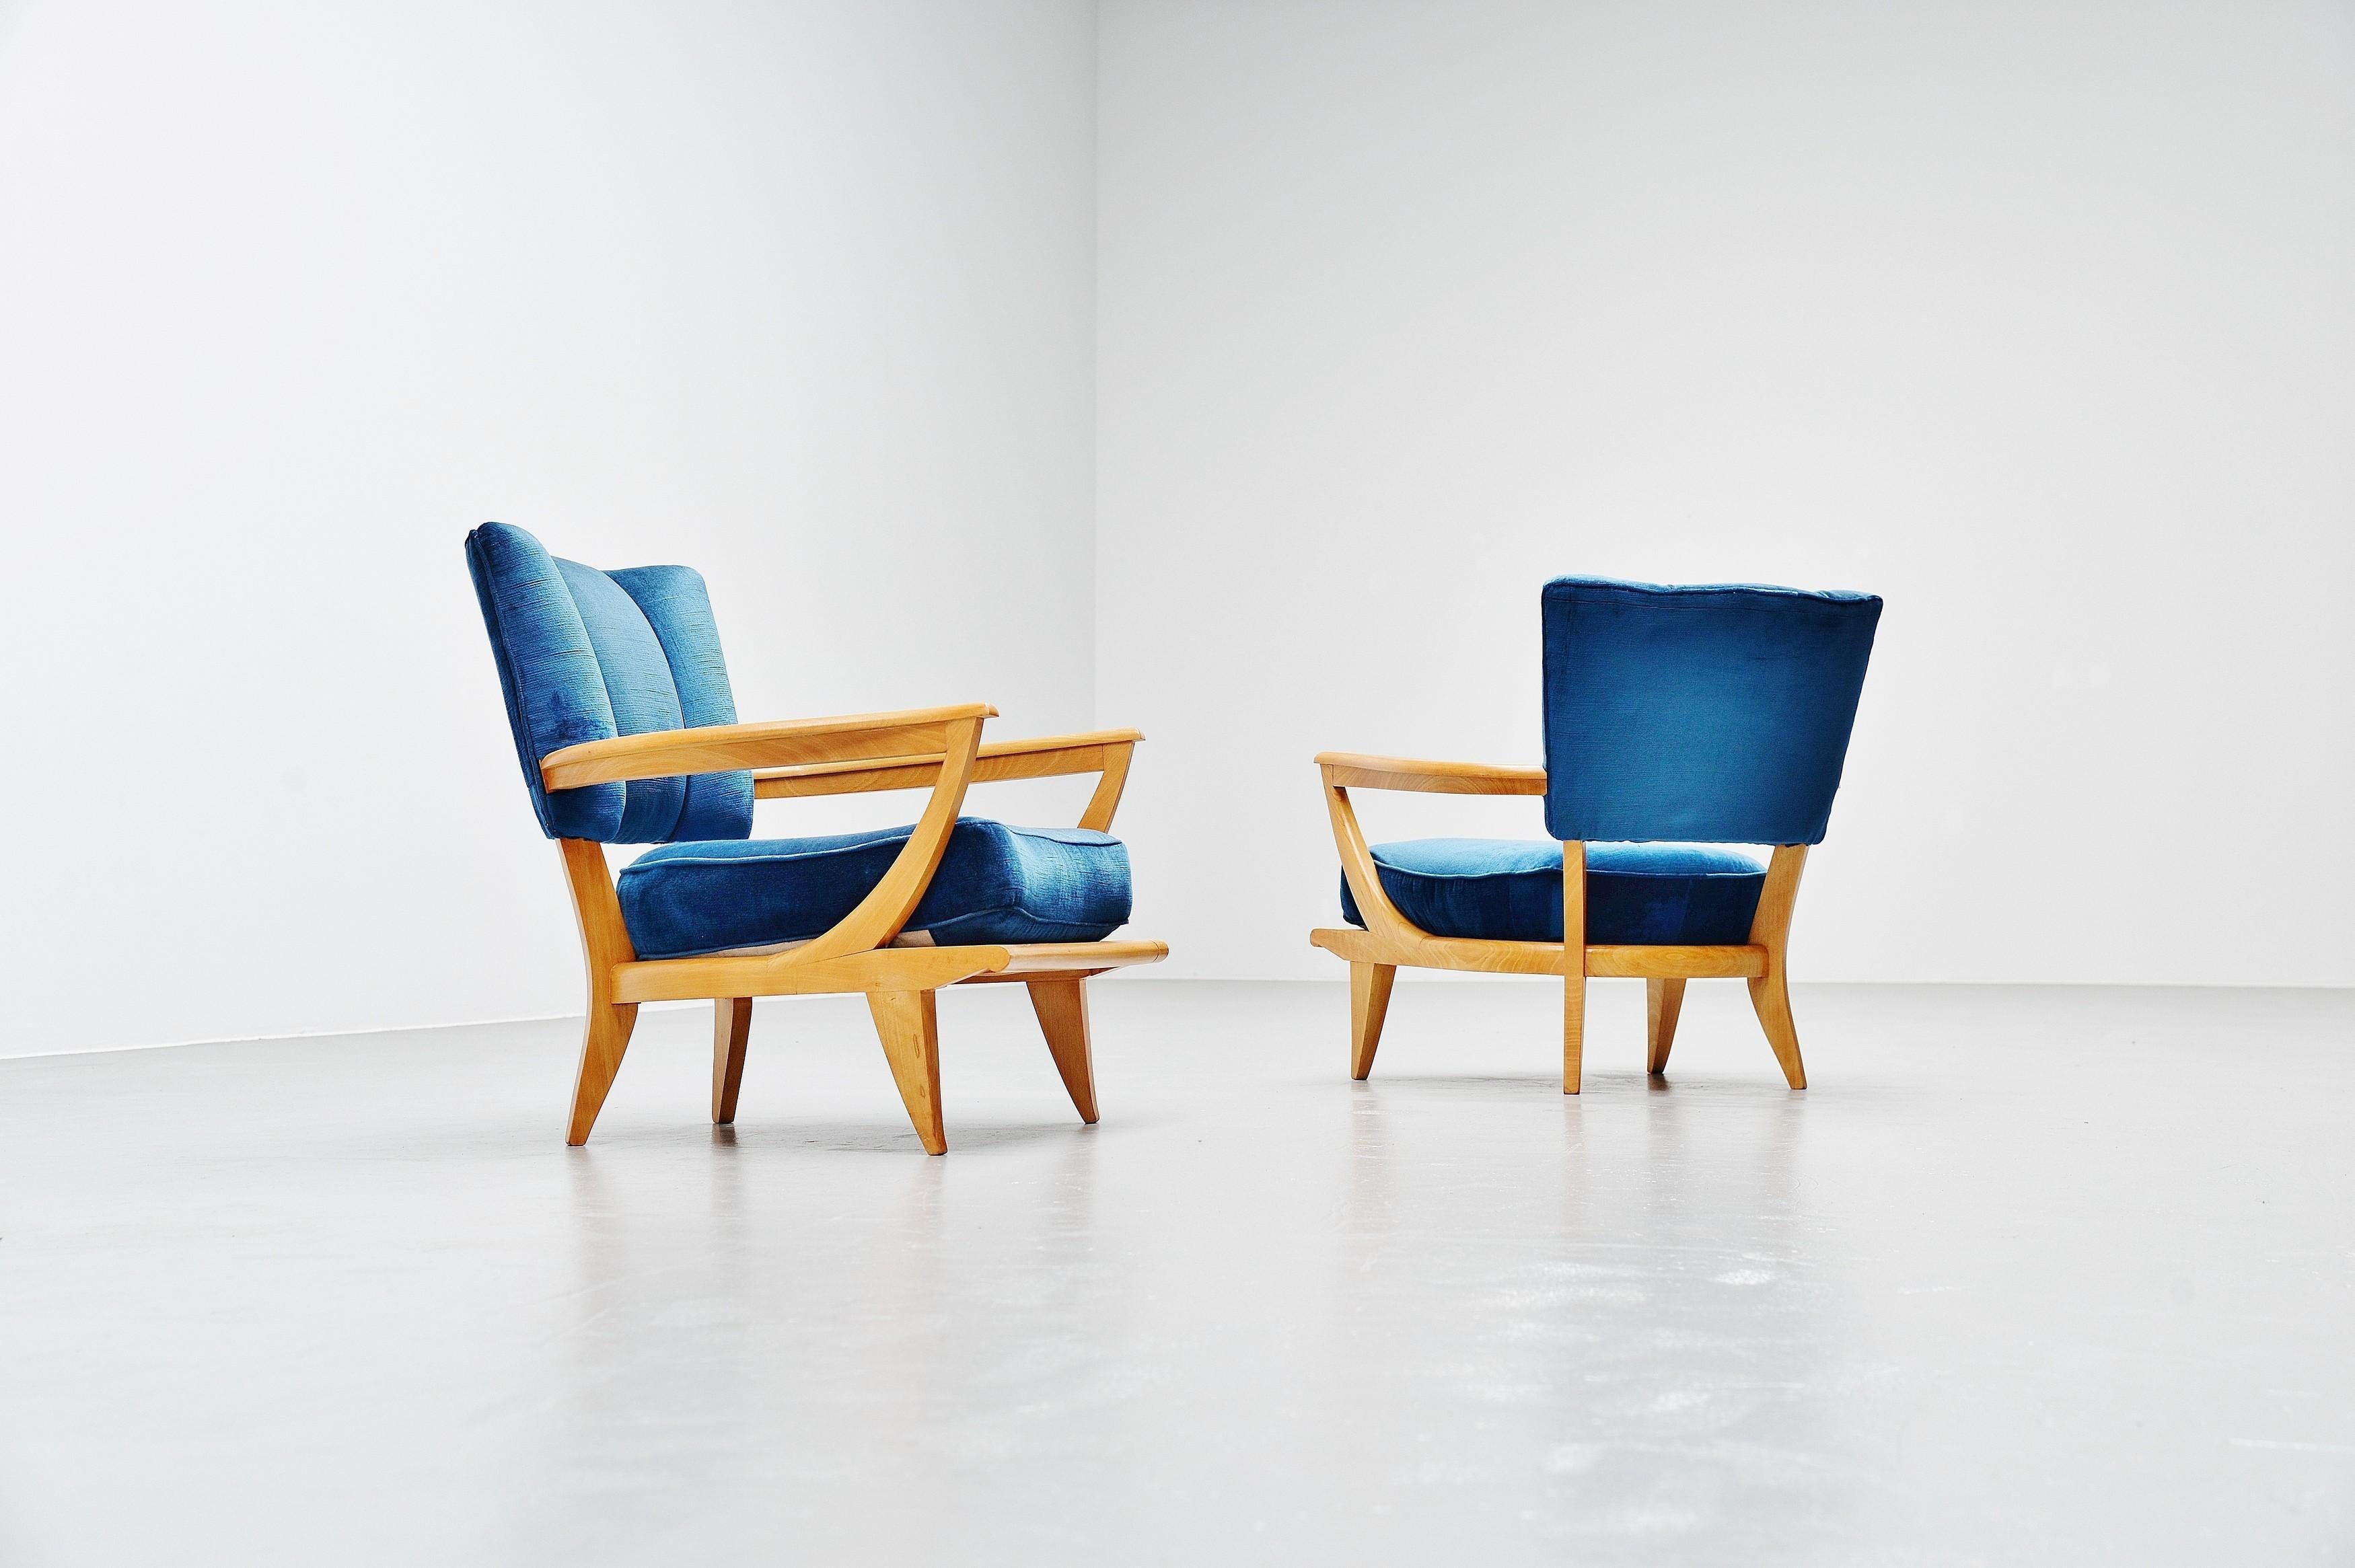 Etienne-Henri Martin SK40 Lounge Chairs Steiner 1952 Blue In Good Condition For Sale In Roosendaal, Noord Brabant